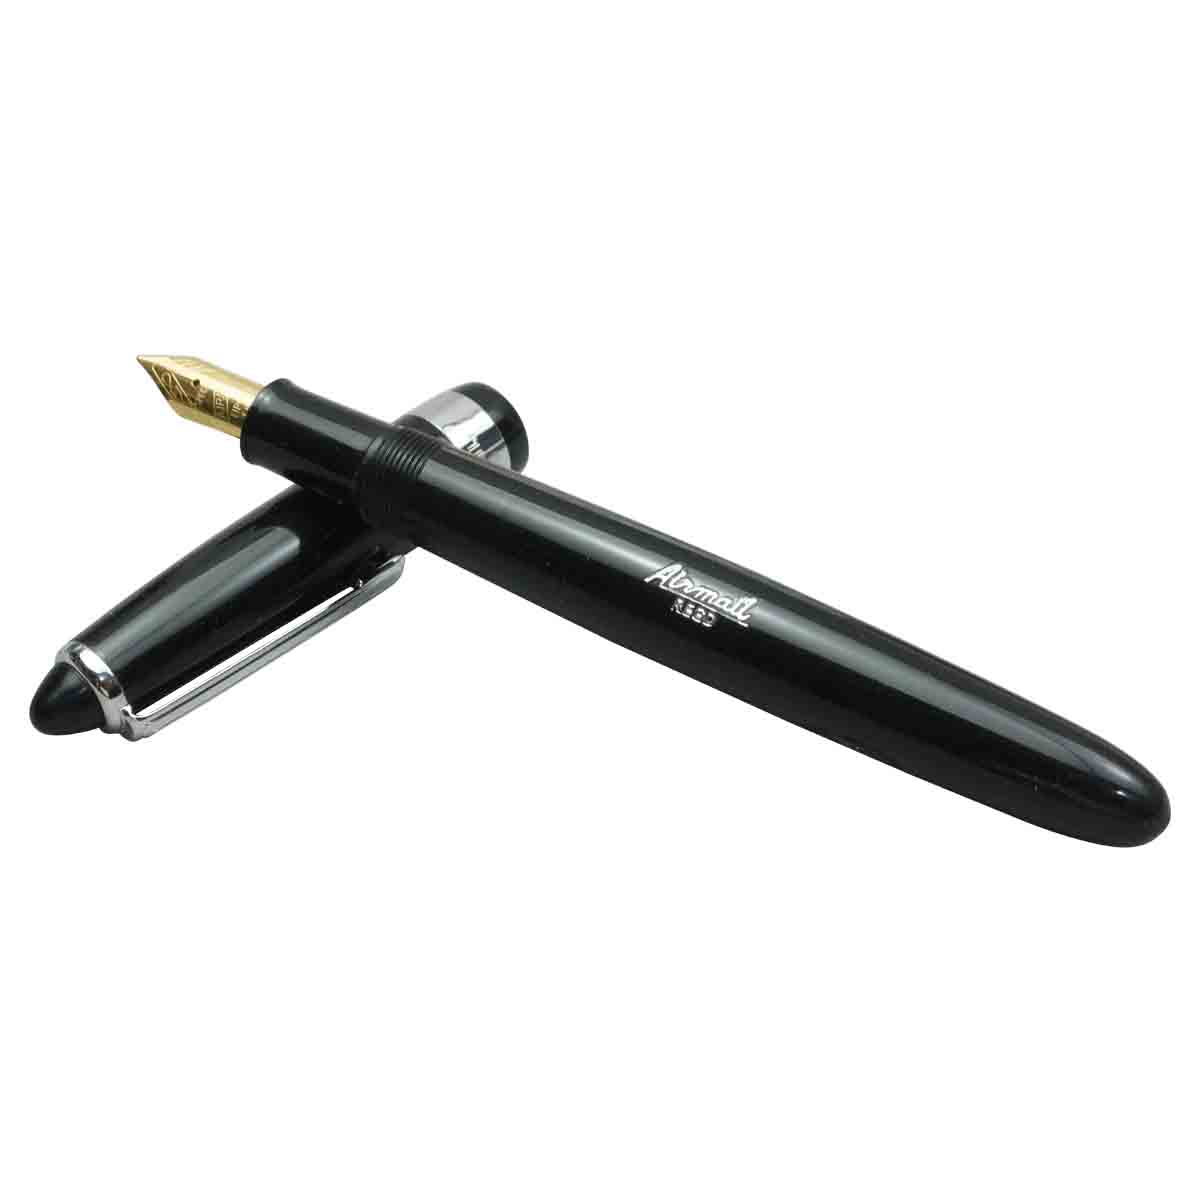 Airmail - Wality - 69LC - Fine Tip - Black Color Body Fountain Pen Model 18556